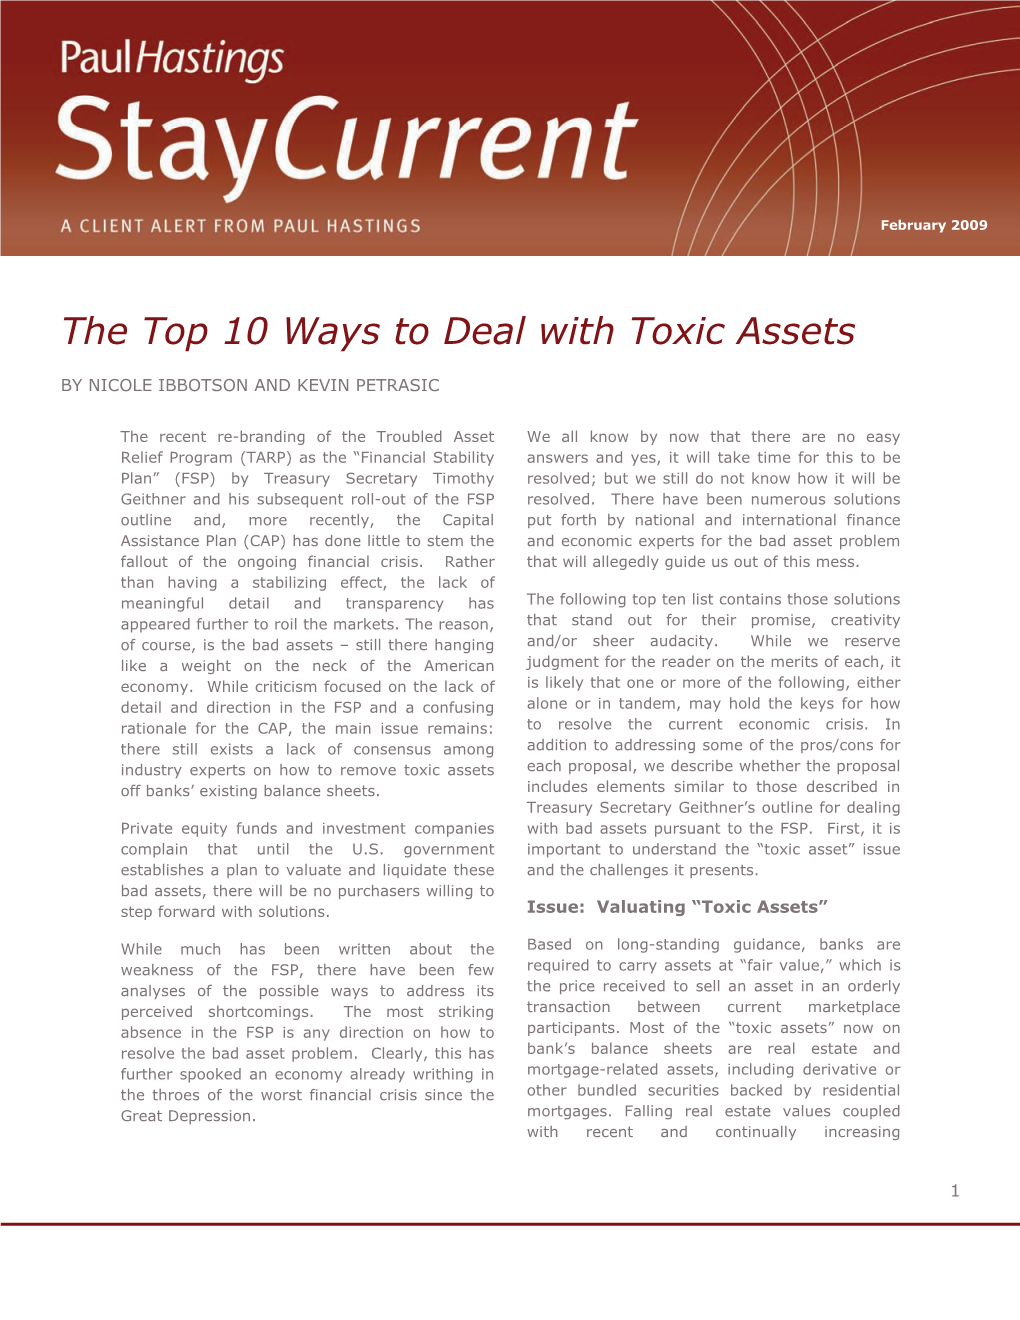 The Top 10 Ways to Deal with Toxic Assets